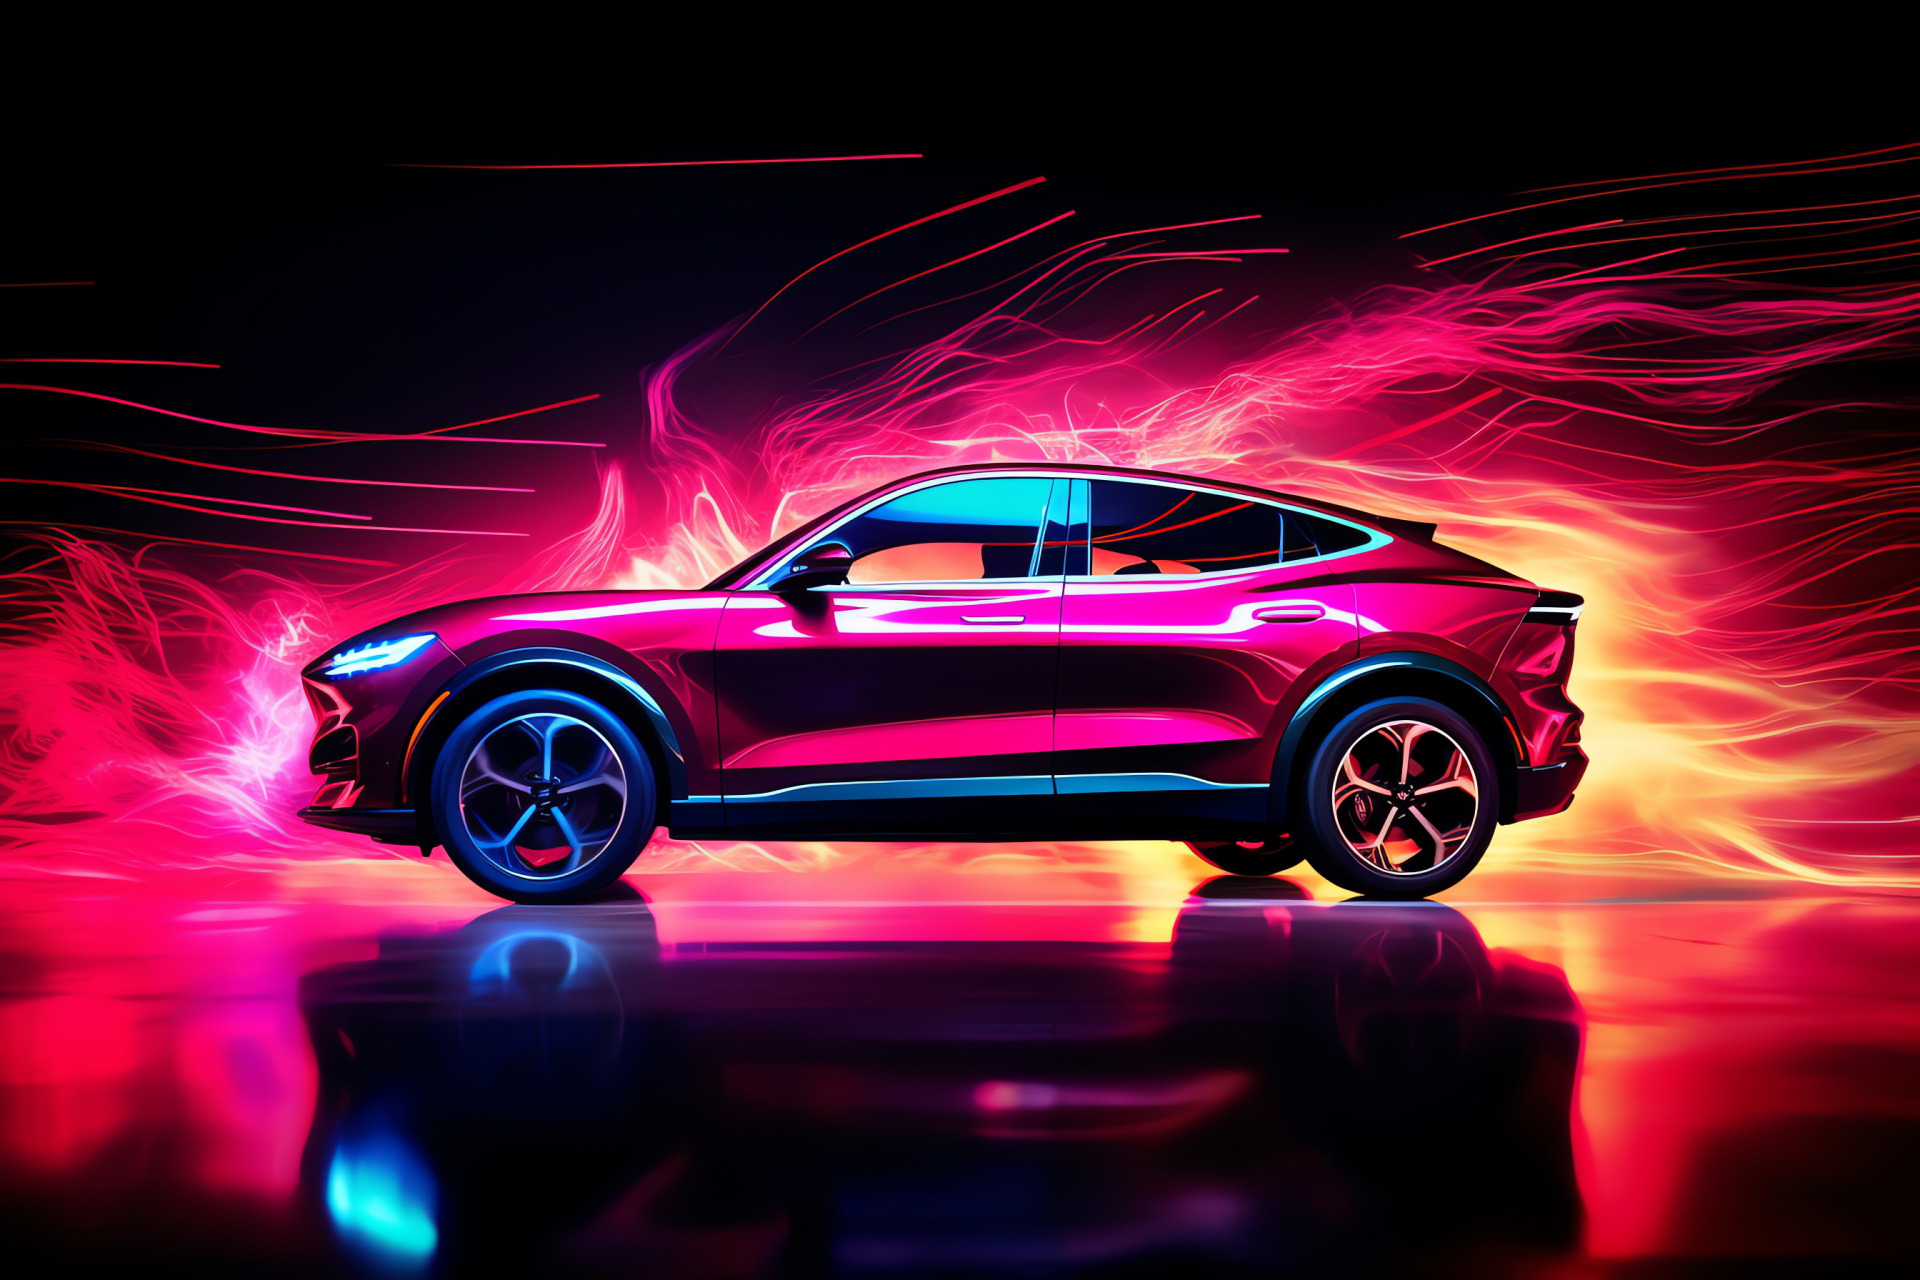 Muscle car energy, Electric-hued art context, Automotive side view, Neon glow, Energetic performance, HD Desktop Image